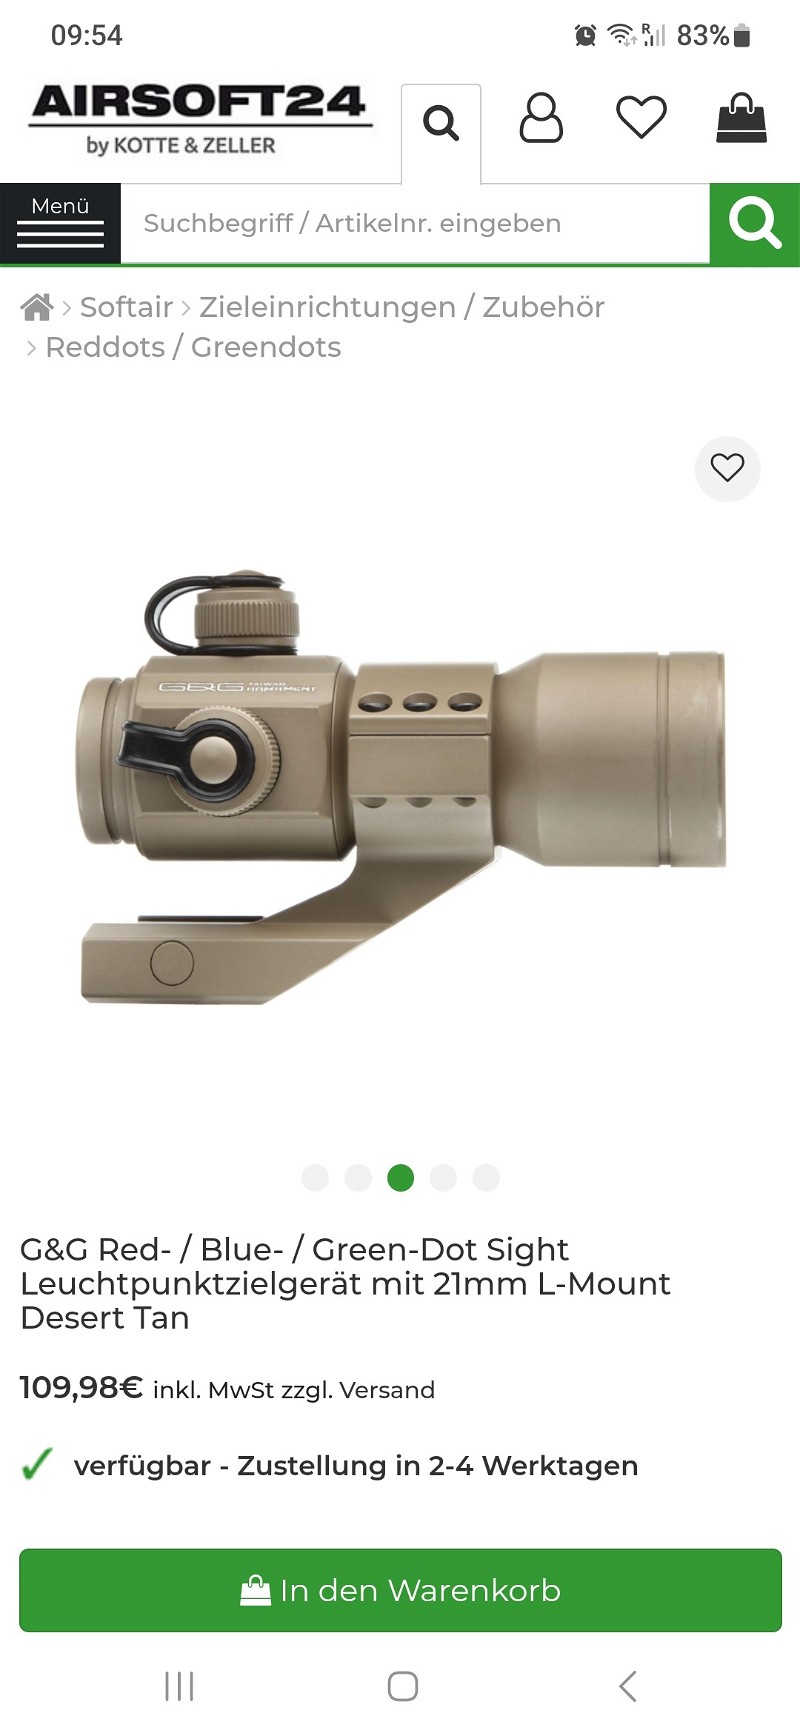 Image 1 for G&G Red- / Blue- / Green-Dot Sight